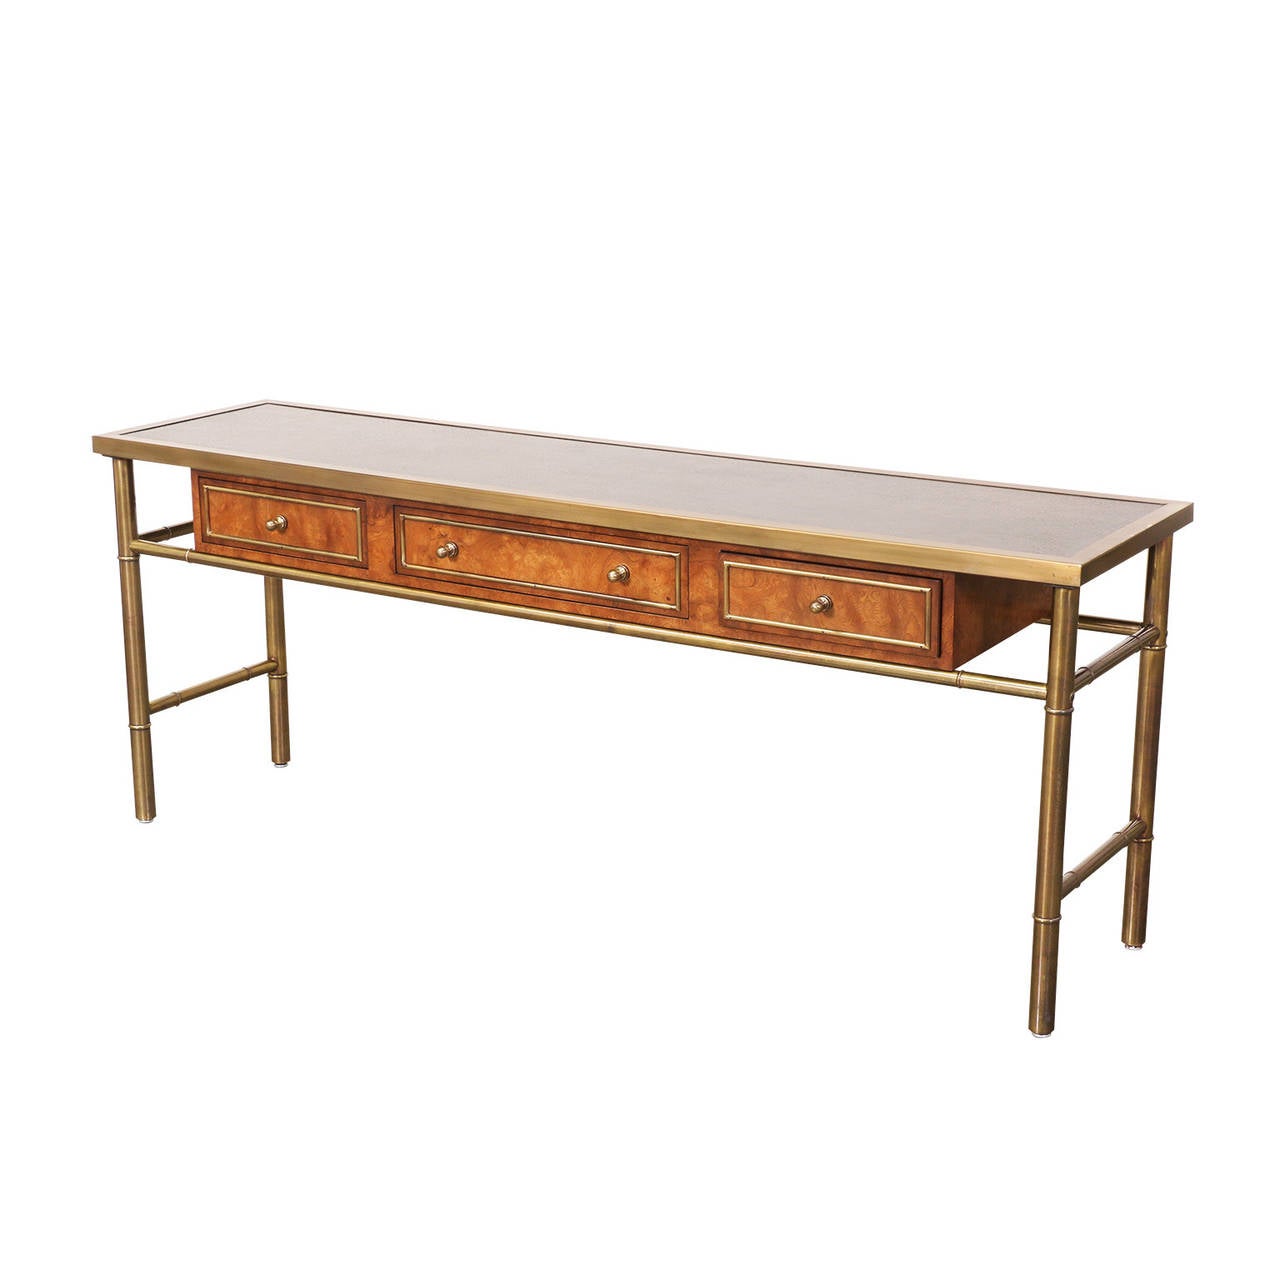 American Mastercraft Amboyna Burl Wood & Patinated Brass Console Table w/ Etched Top